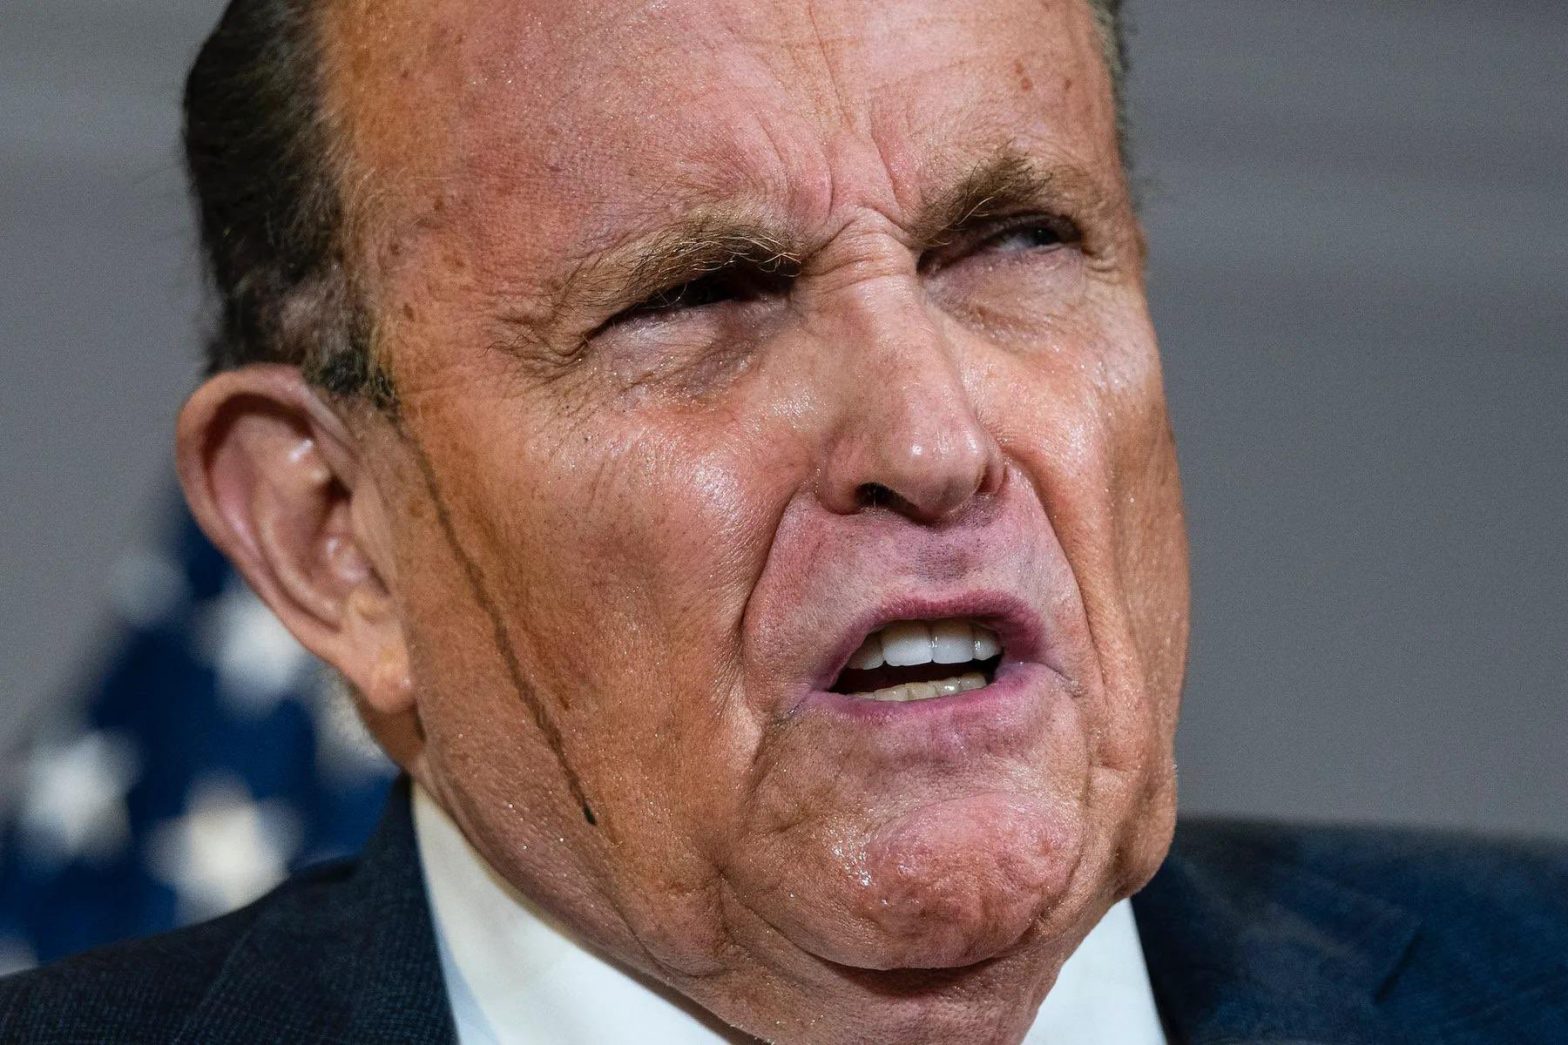 Rudy Giuliani calls Matt Damon a homophobic slur in audio transcript submitted by ex-assistant Noelle Dunphy